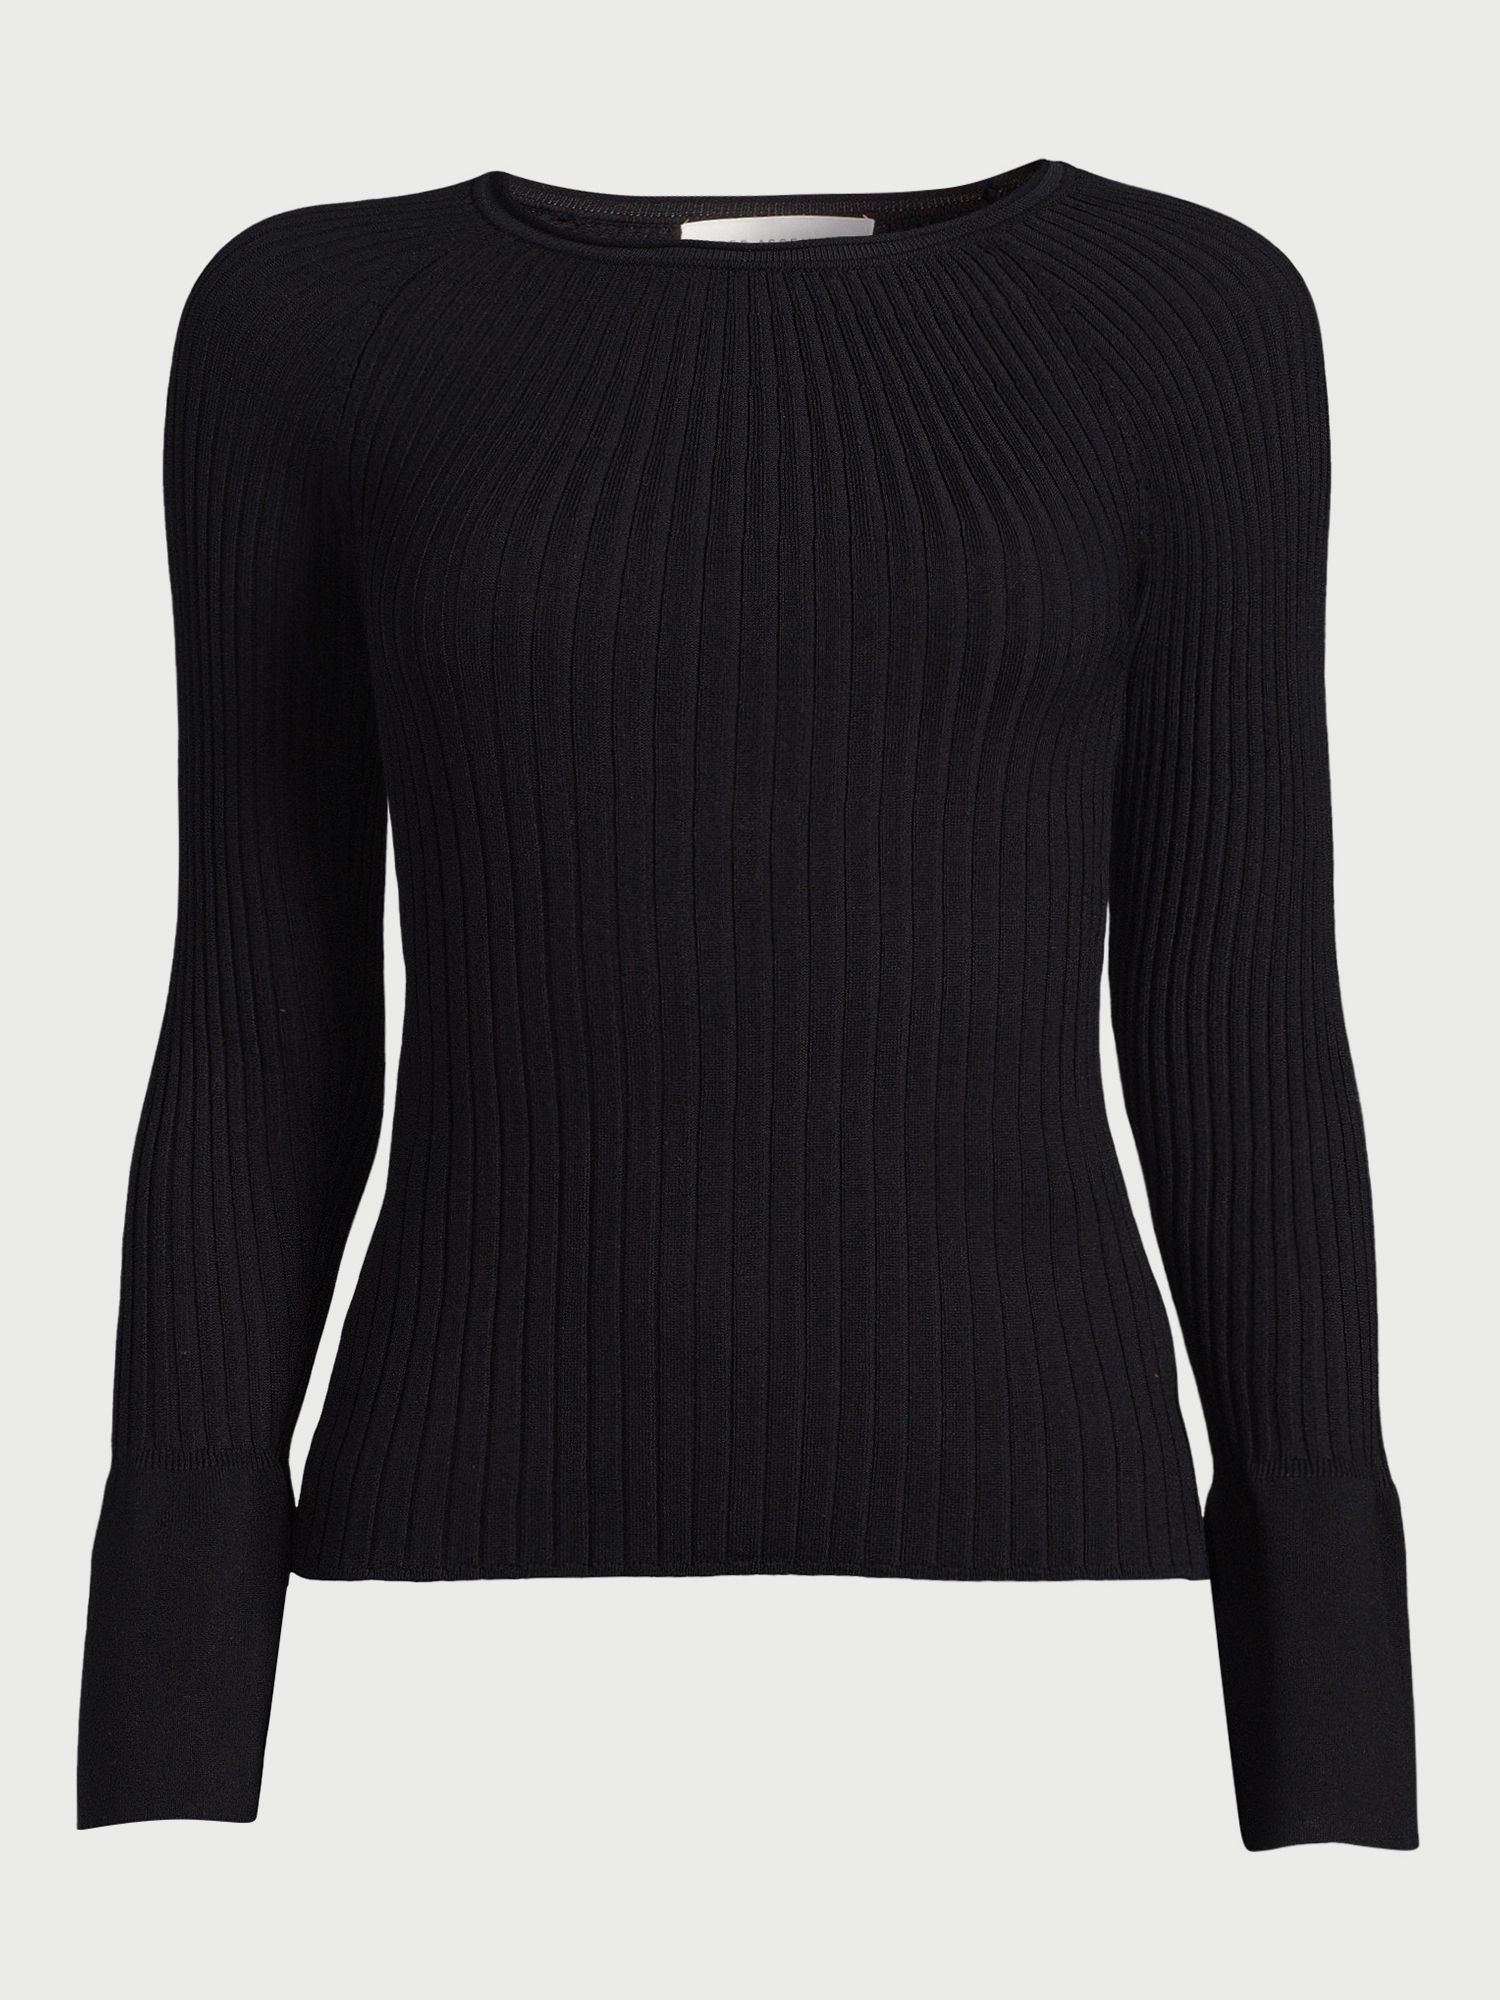 Free Assembly Women's Radiating Ribbed Sweater with Long Sleeves, Midweight, Sizes XS-XXXL | Walmart (US)